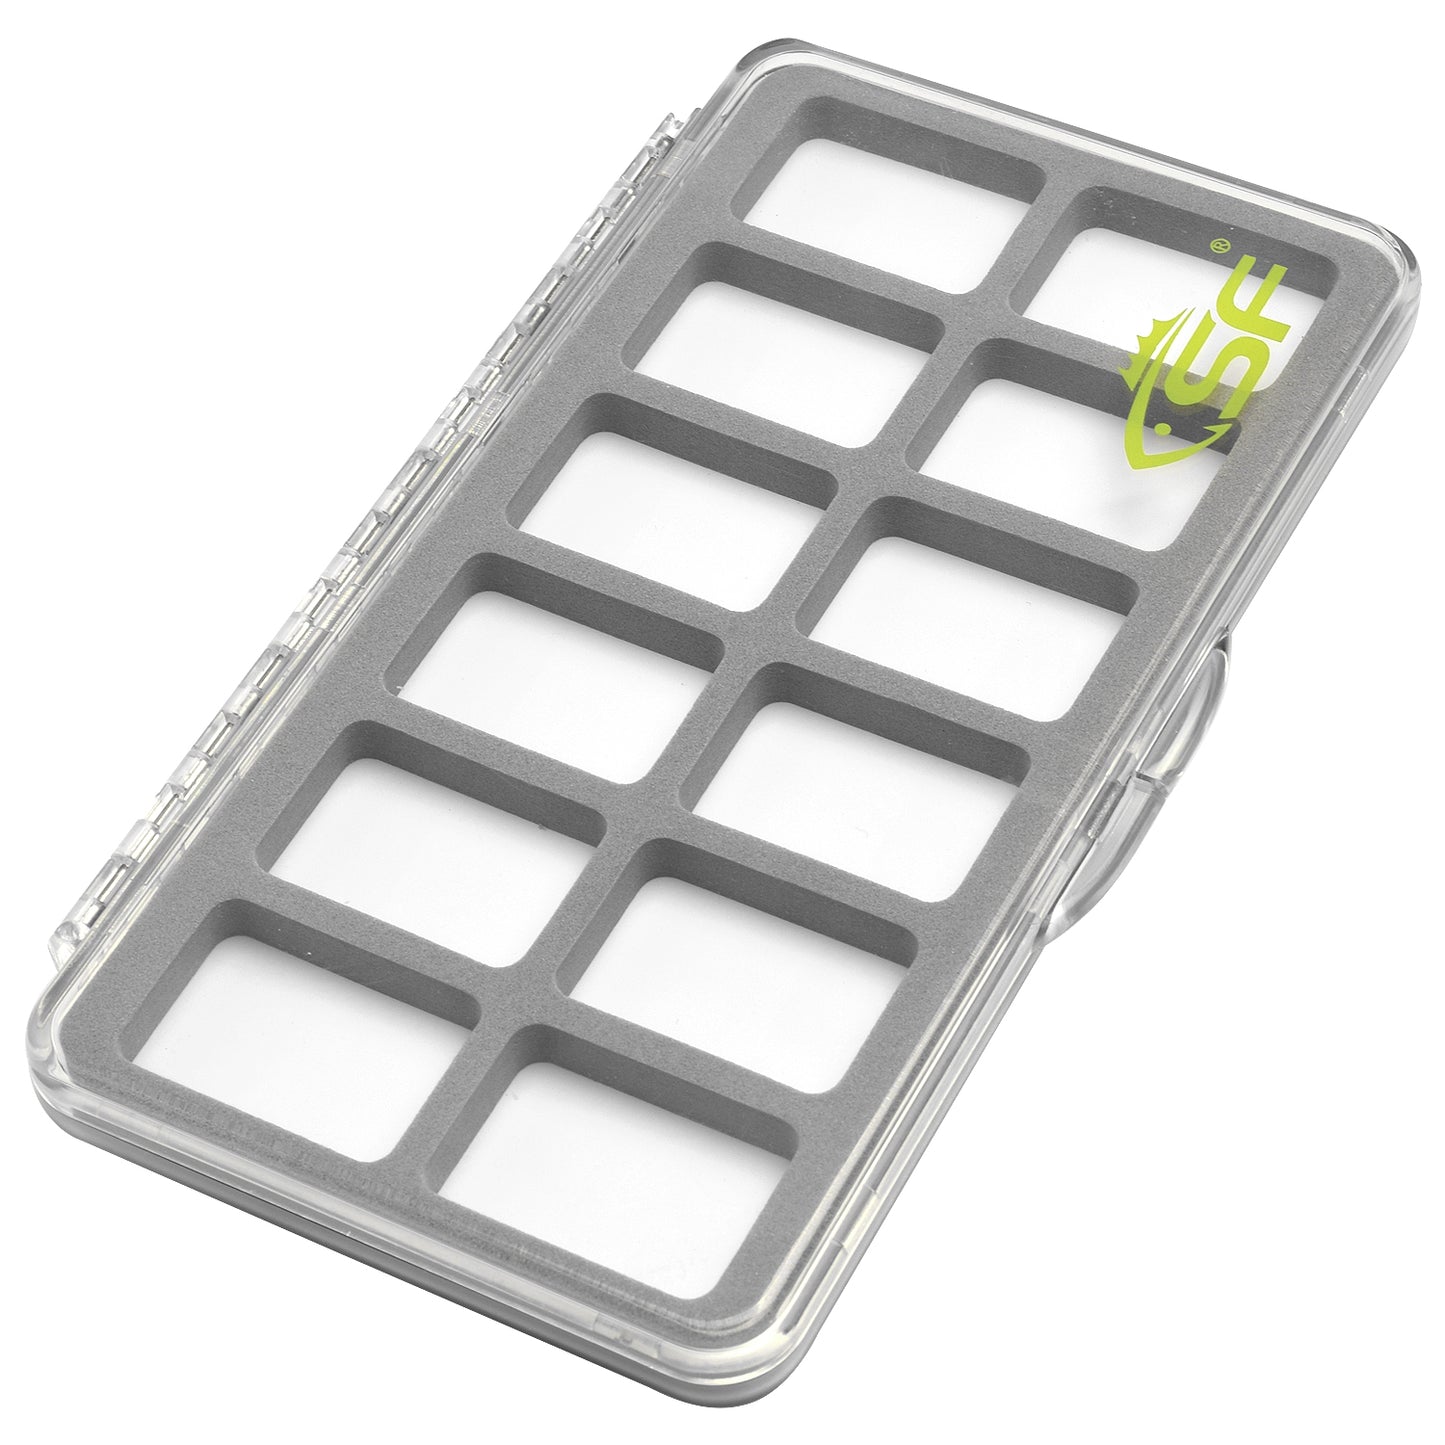 SF Slim Floatable Fly Box Super Thin Clear Multi Magnetic 6/12/18 Compartments